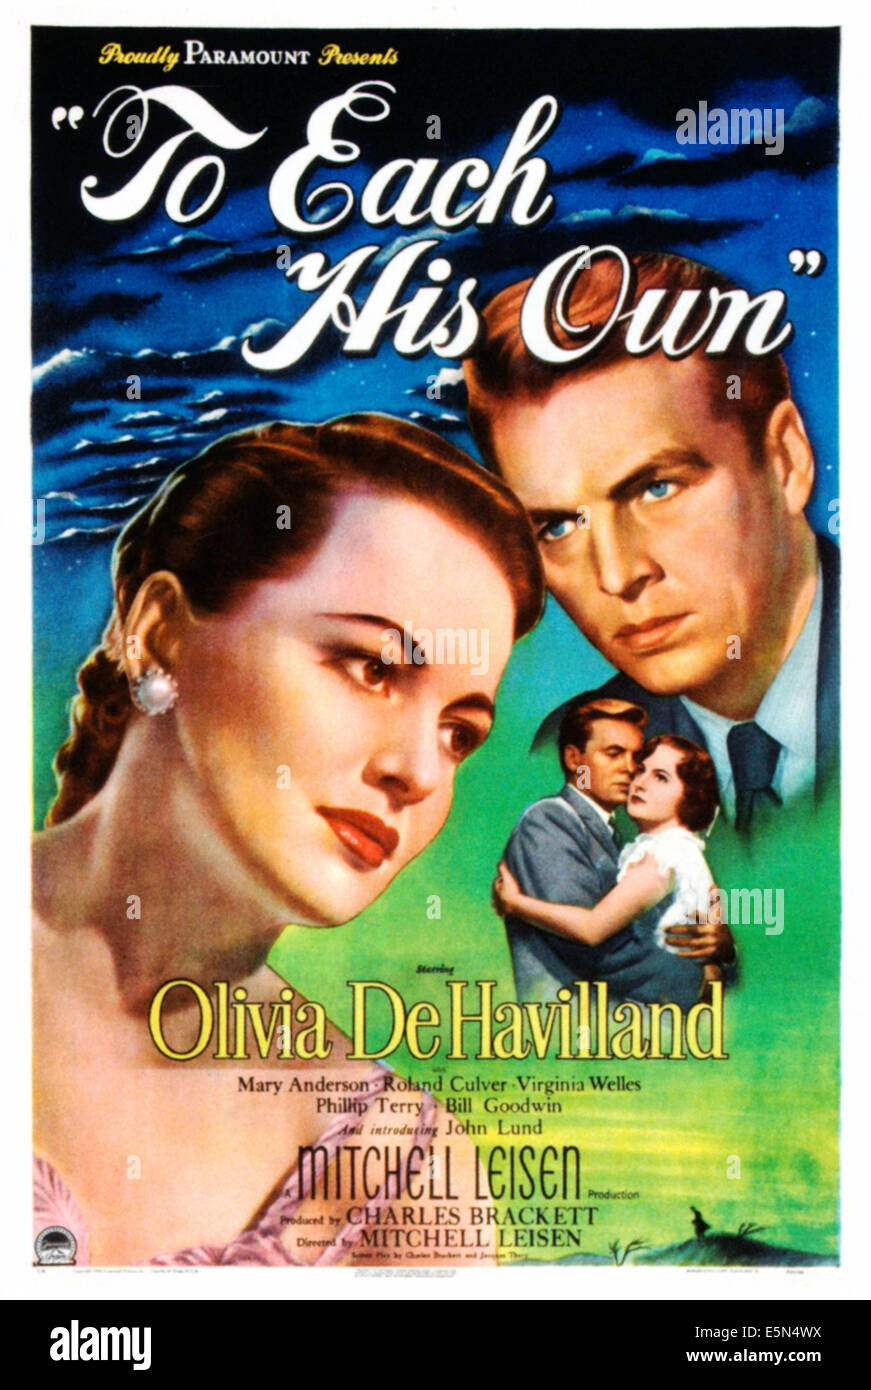 TO EACH HIS OWN, from left: Olivia de Havilland, John Lund, bottom from left: John Lund, Olivia de Havilland on poster art, 1946 Stock Photo